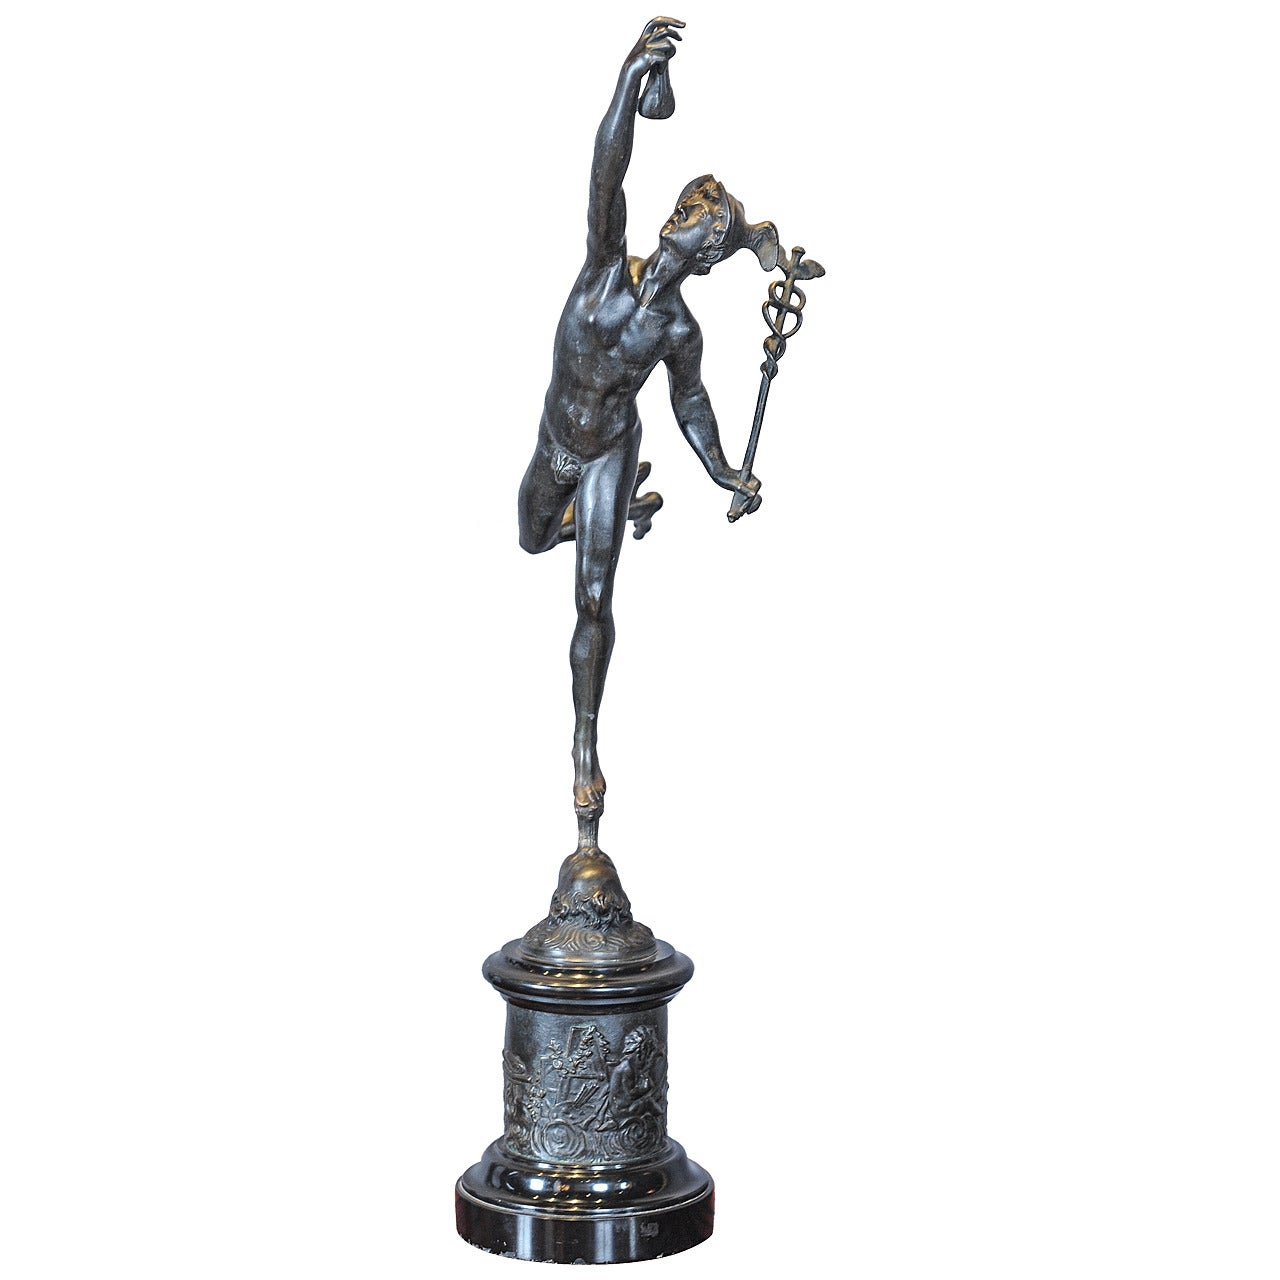 A large patinated bronze sculpture of Hermes / Mercury after Giambogna